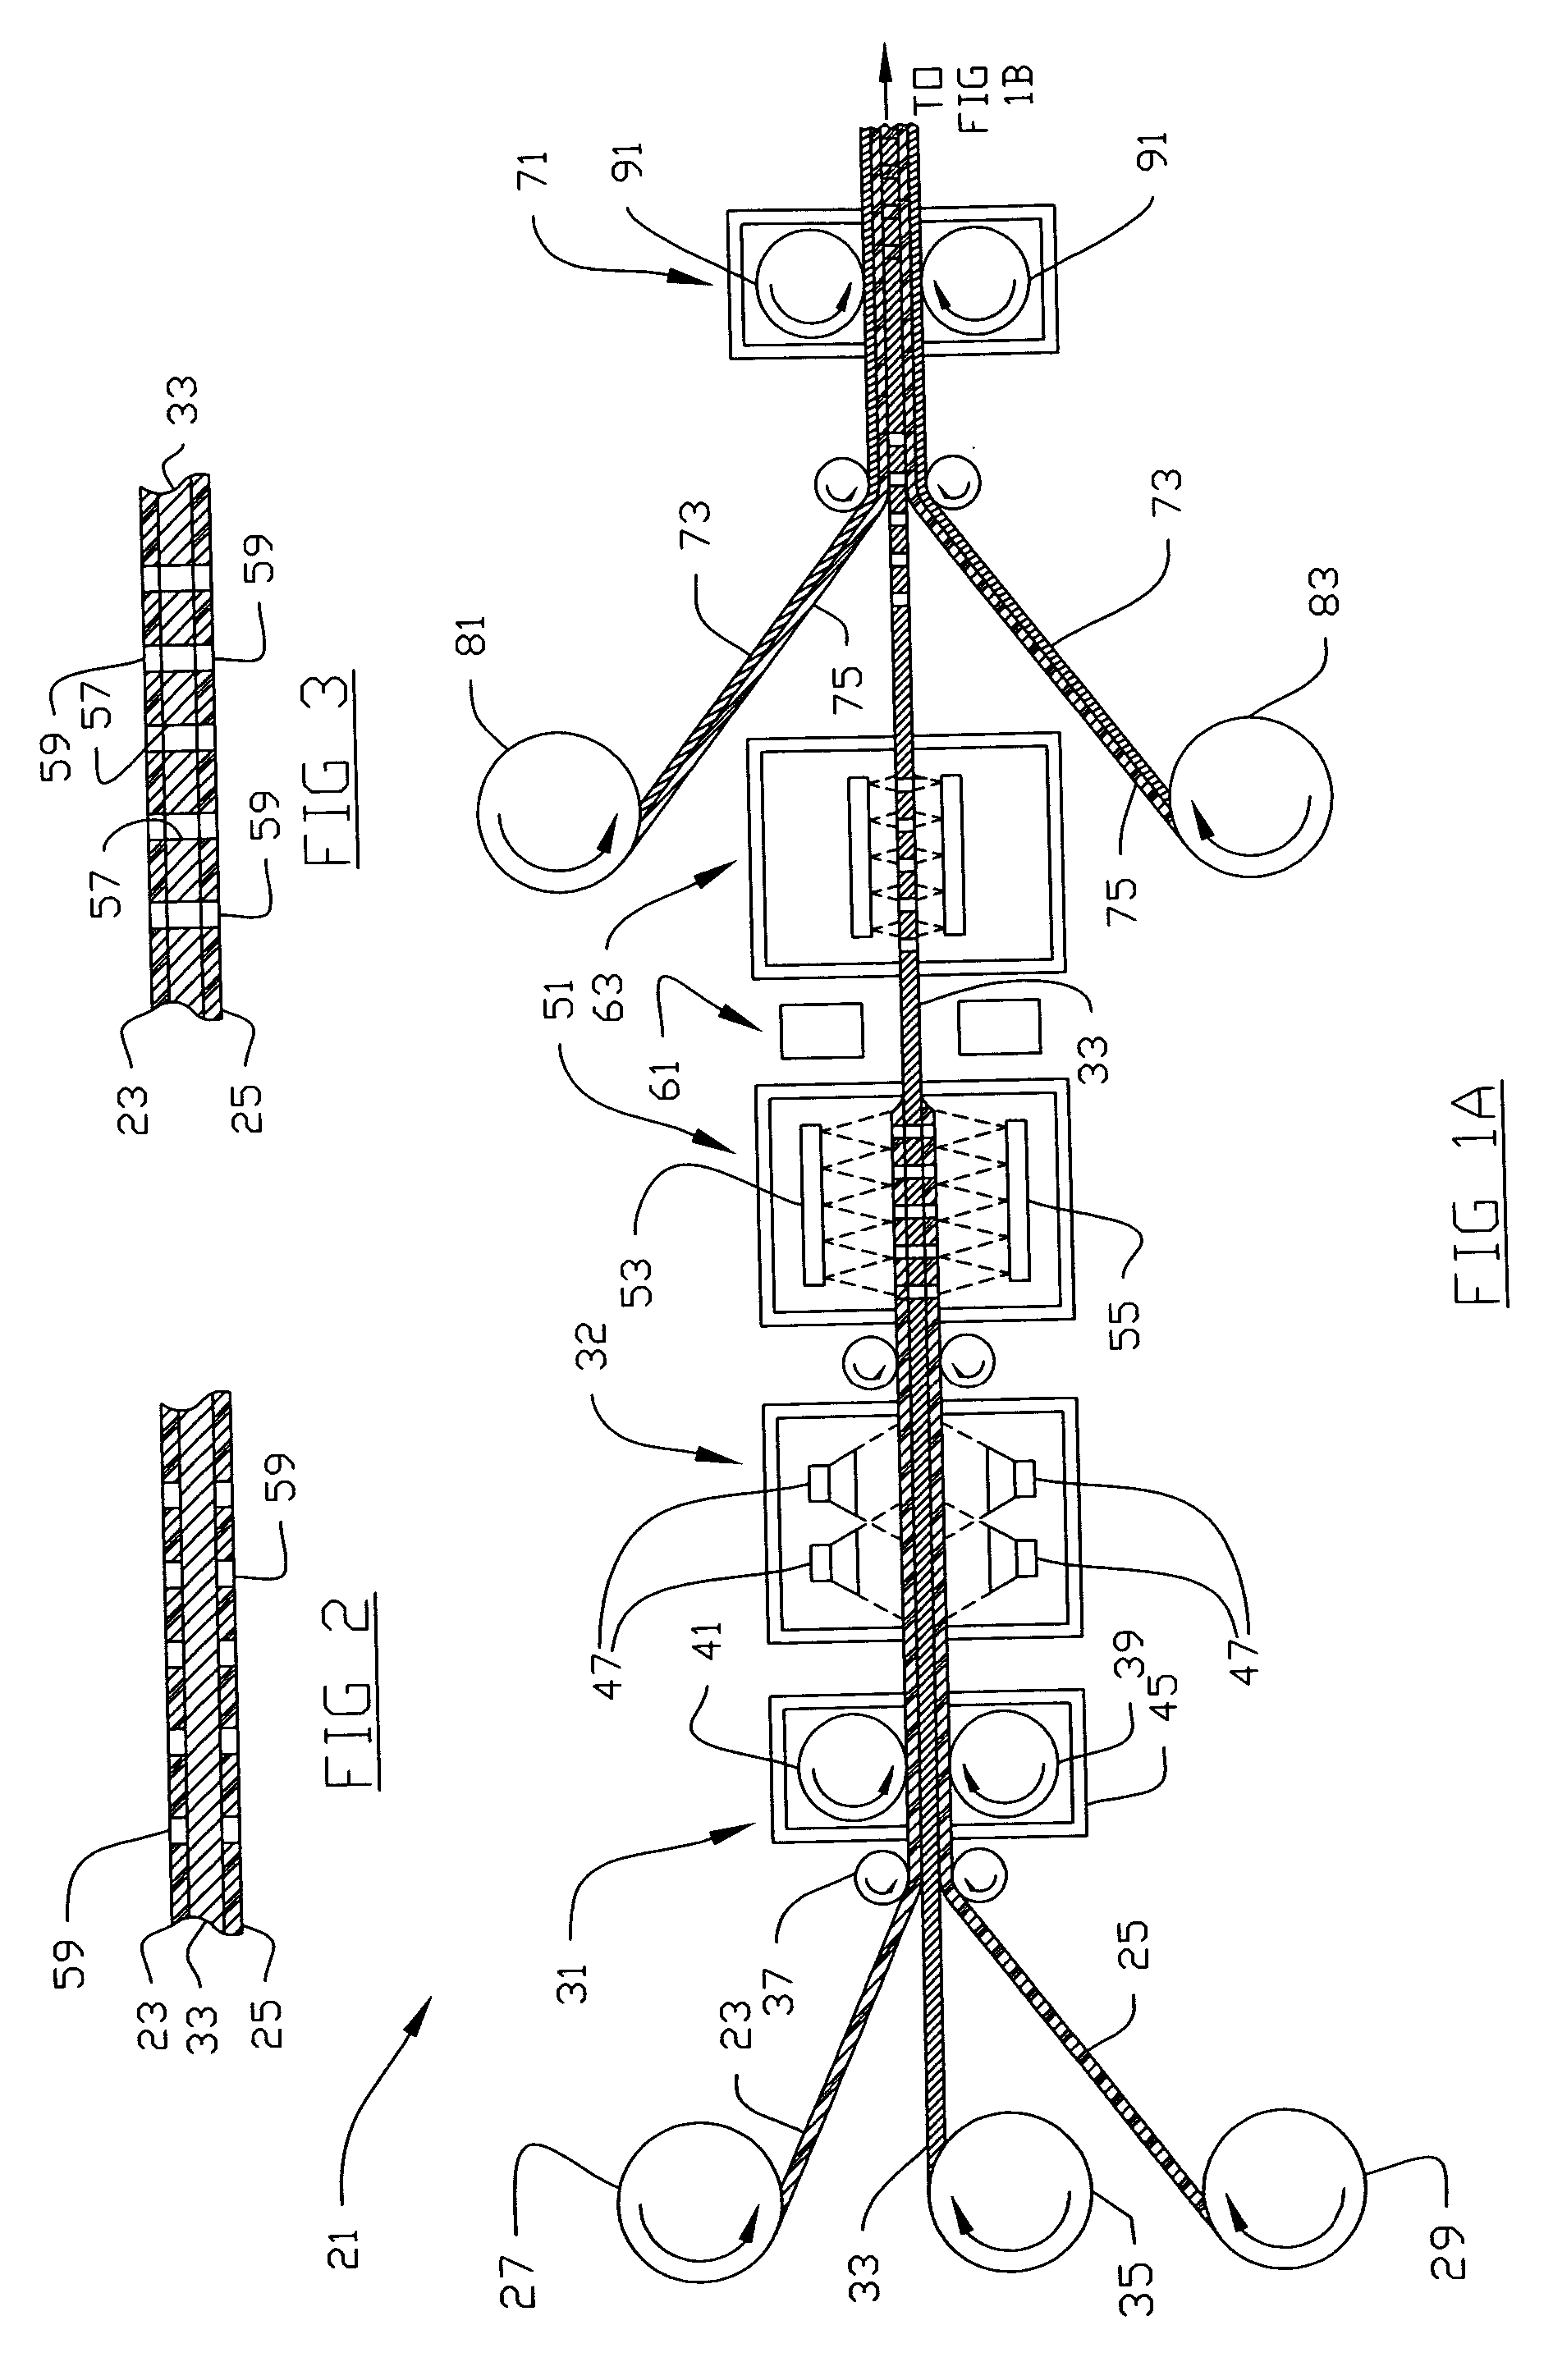 Apparatus and method for making circuitized substrates in a continuous manner